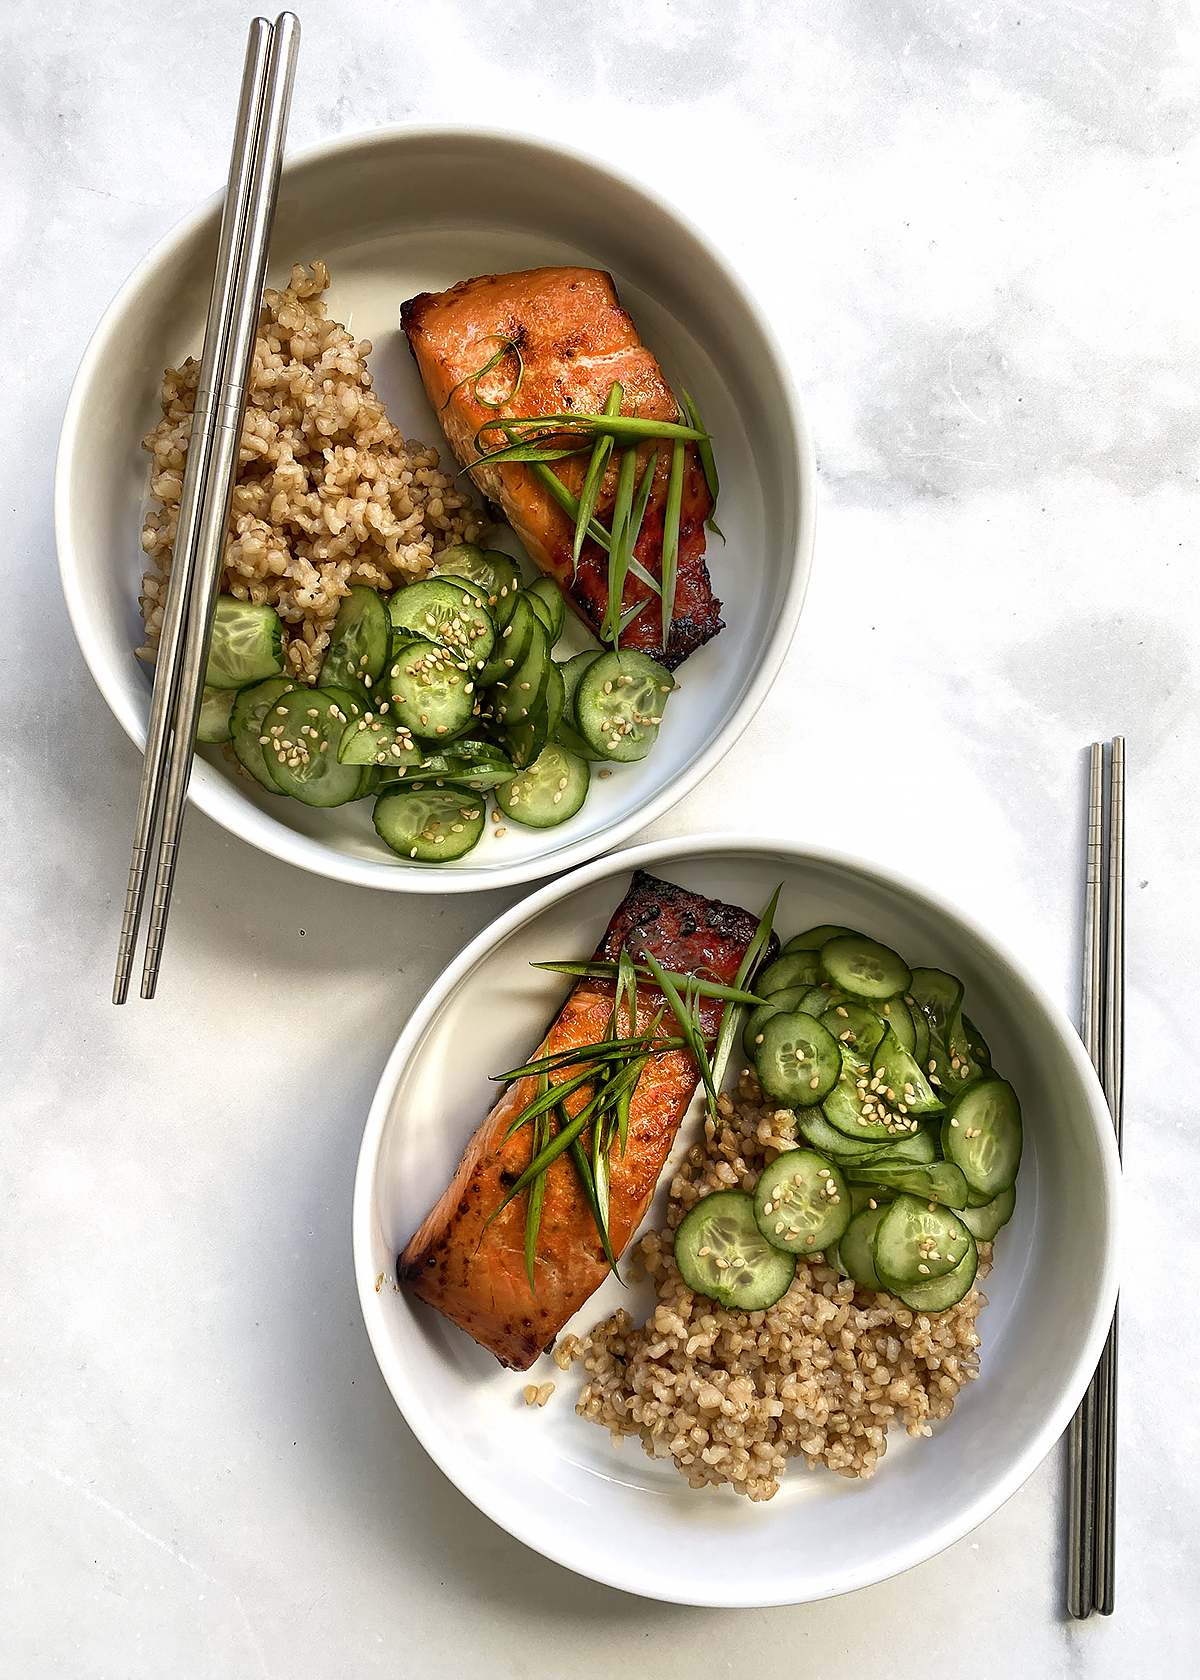 miso salmon with brown rice bowls